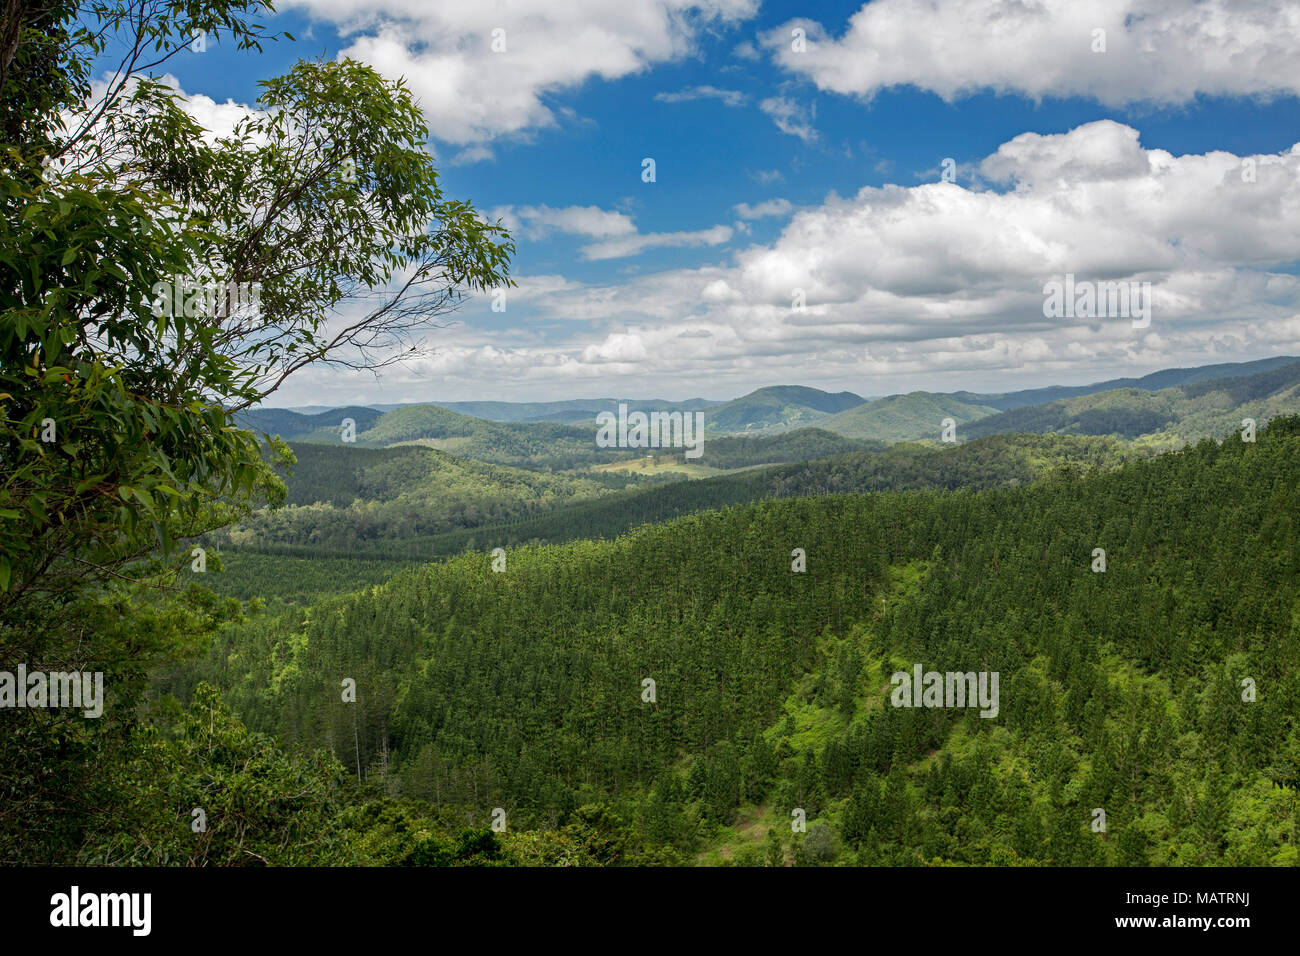 View of landscape of forested hills of Conondale Ranges National Park under blue sky in Queensland Australia Stock Photo